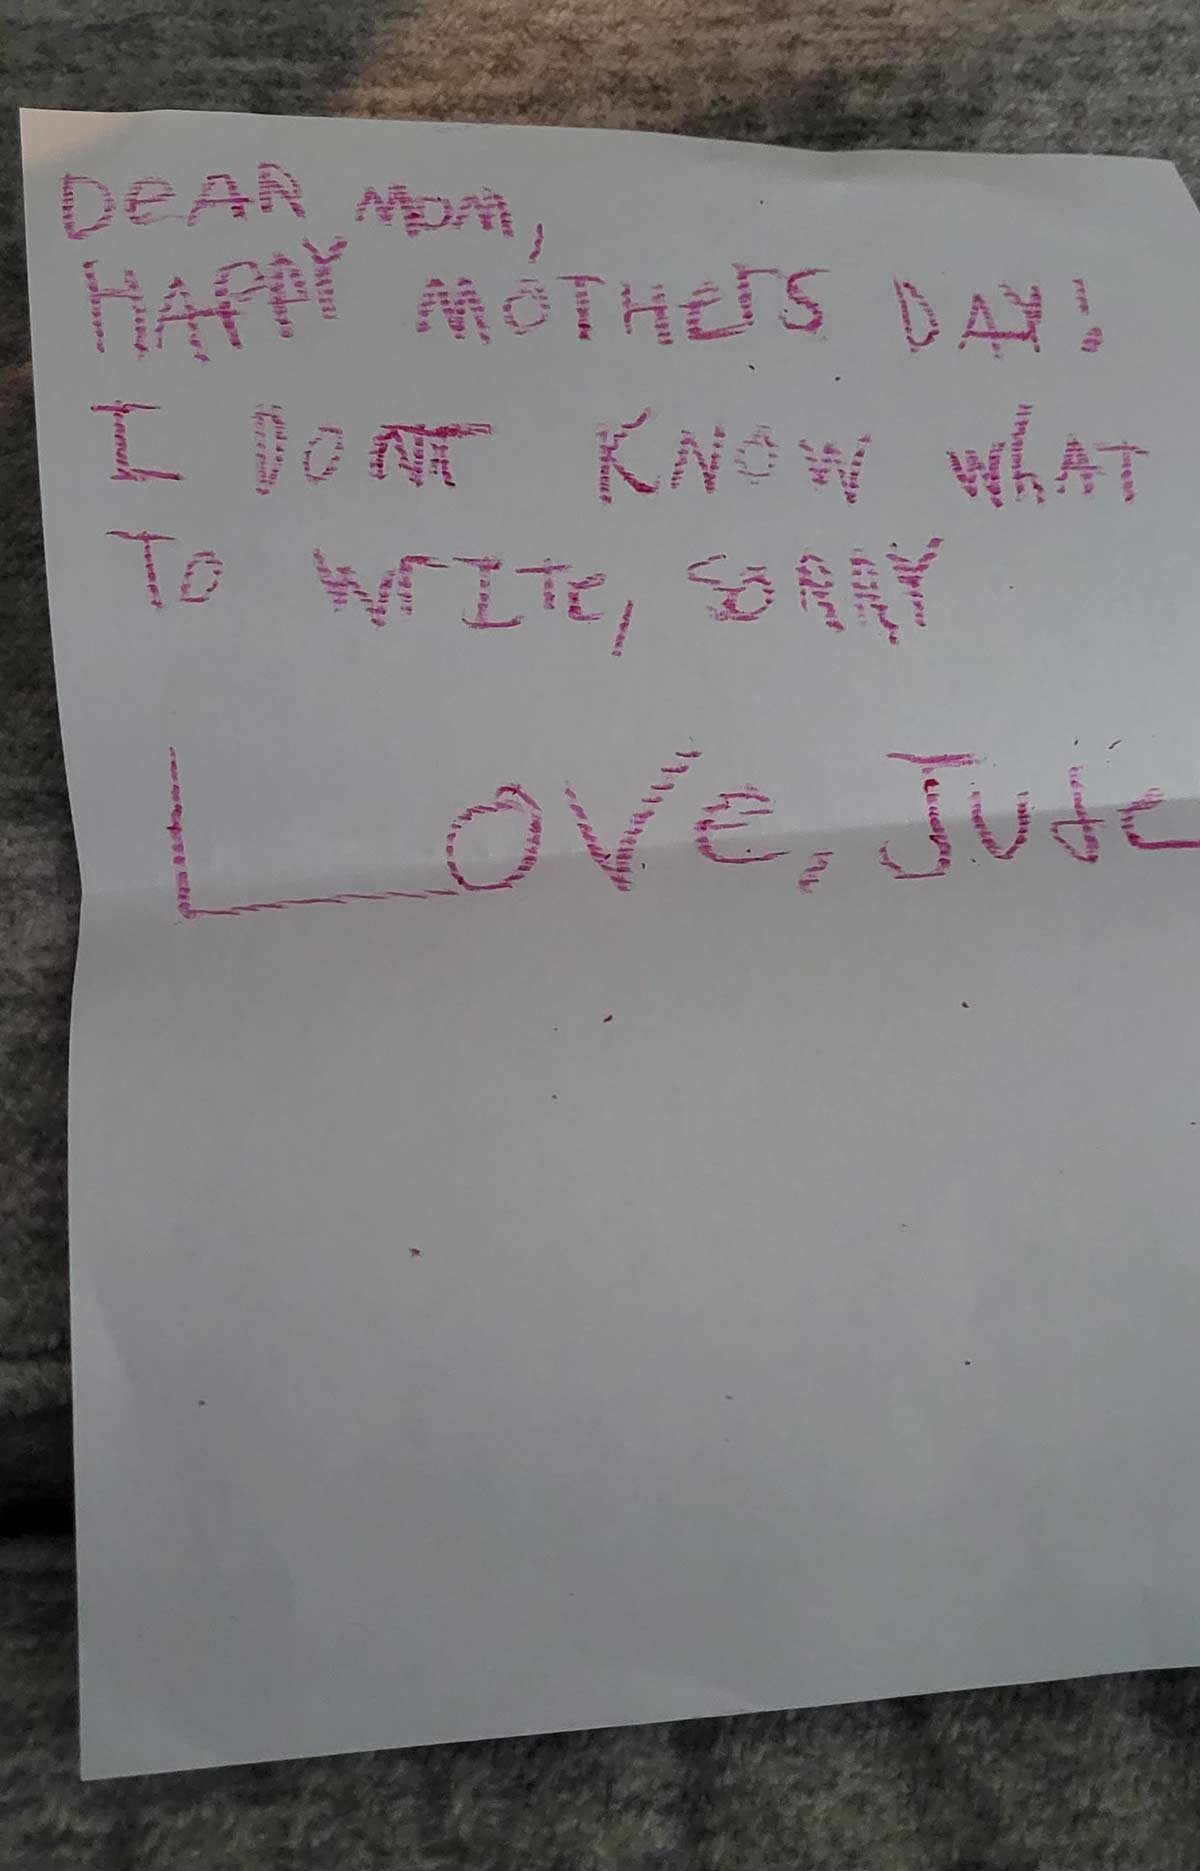 The love my 10-year-old has for me is unparalleled